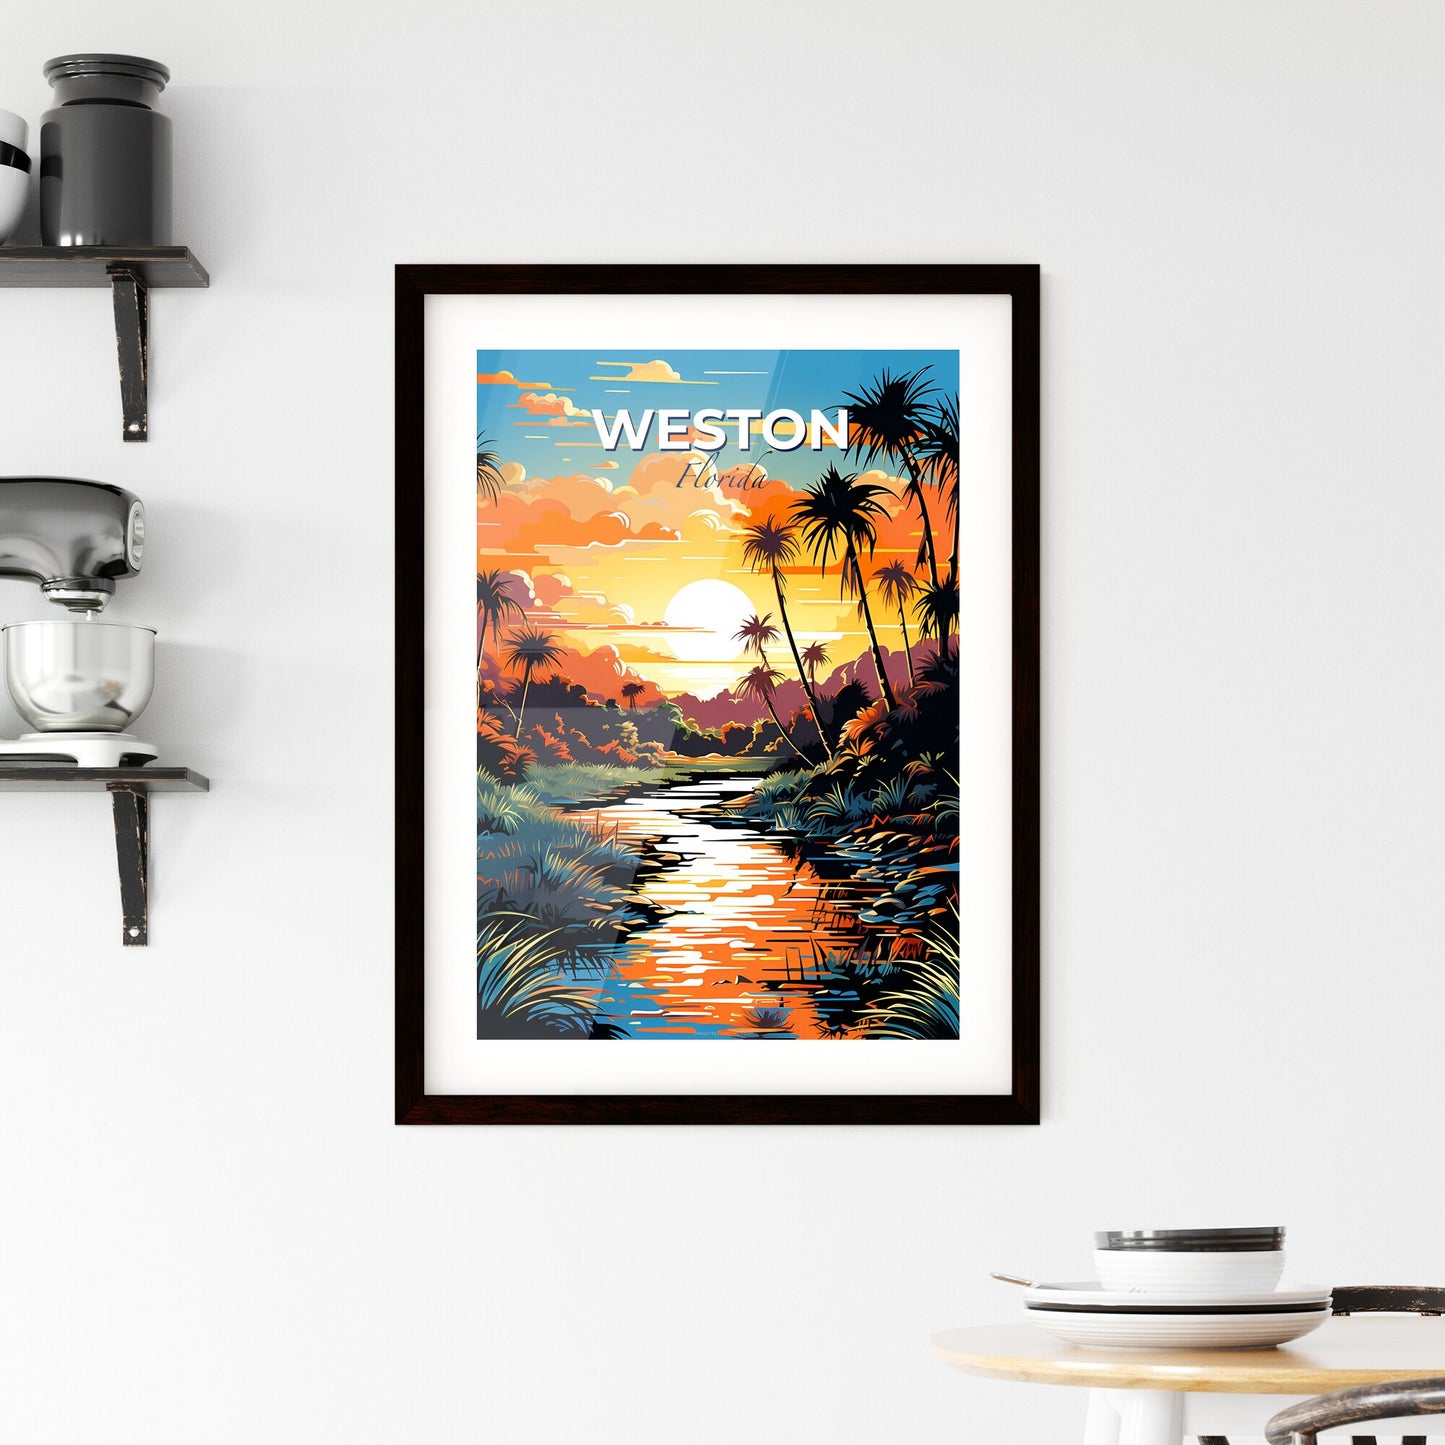 Weston, Florida, A Poster of a river running through a tropical forest Default Title